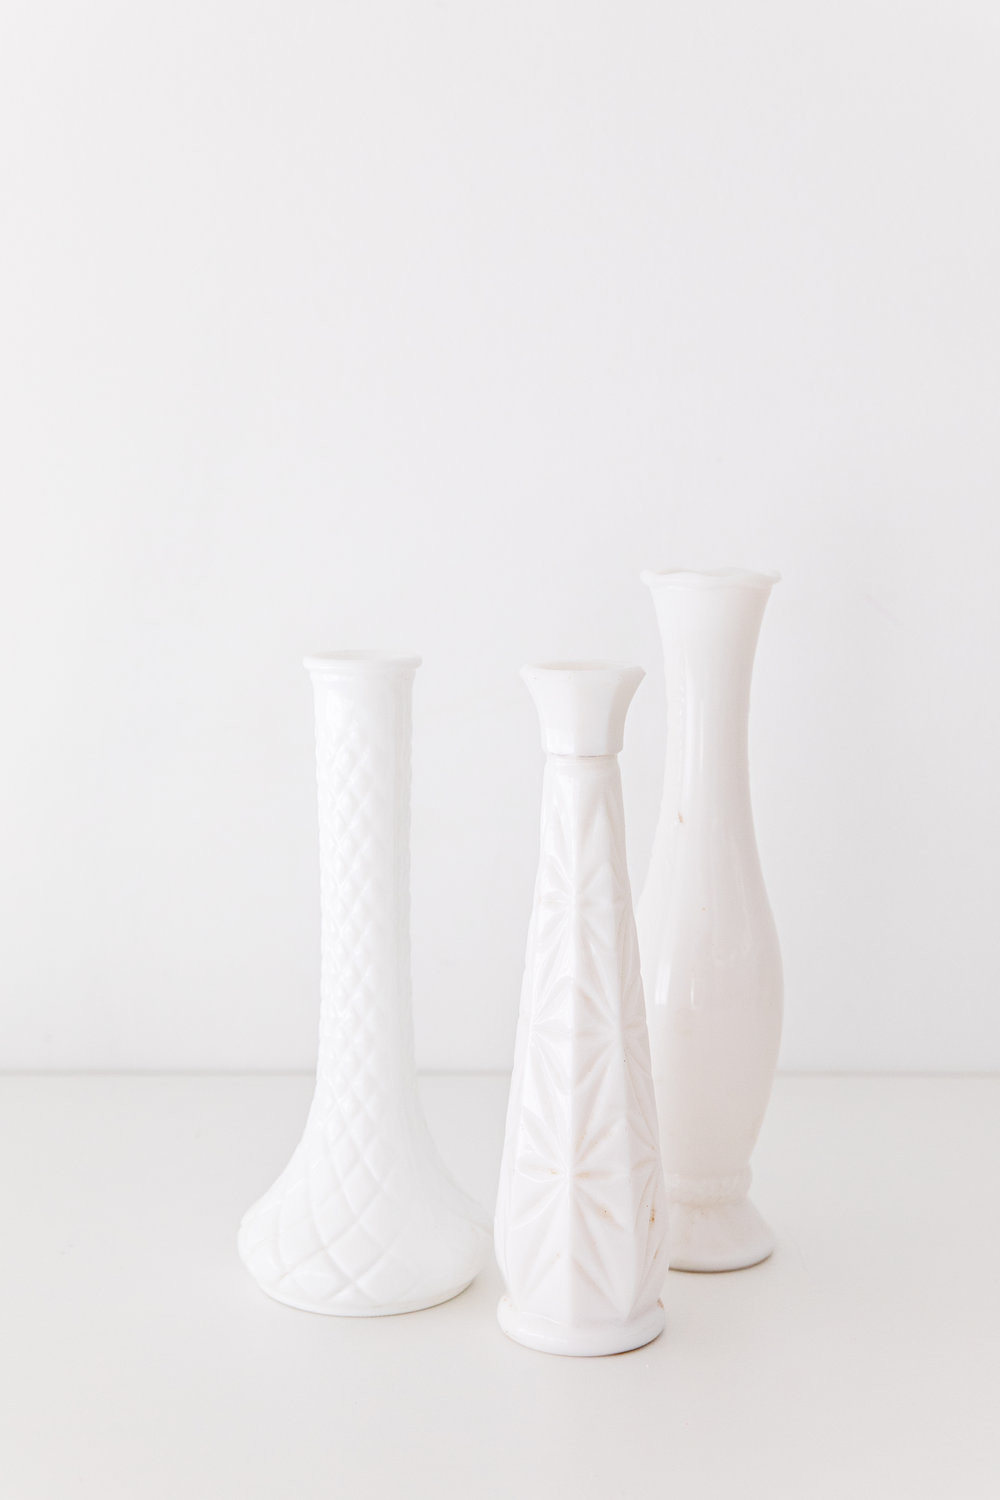 20 Fabulous Antique White Milk Glass Vases 2024 free download antique white milk glass vases of vintage collections heirloomed linen aprons tabletop intended for vintage milk glass vases